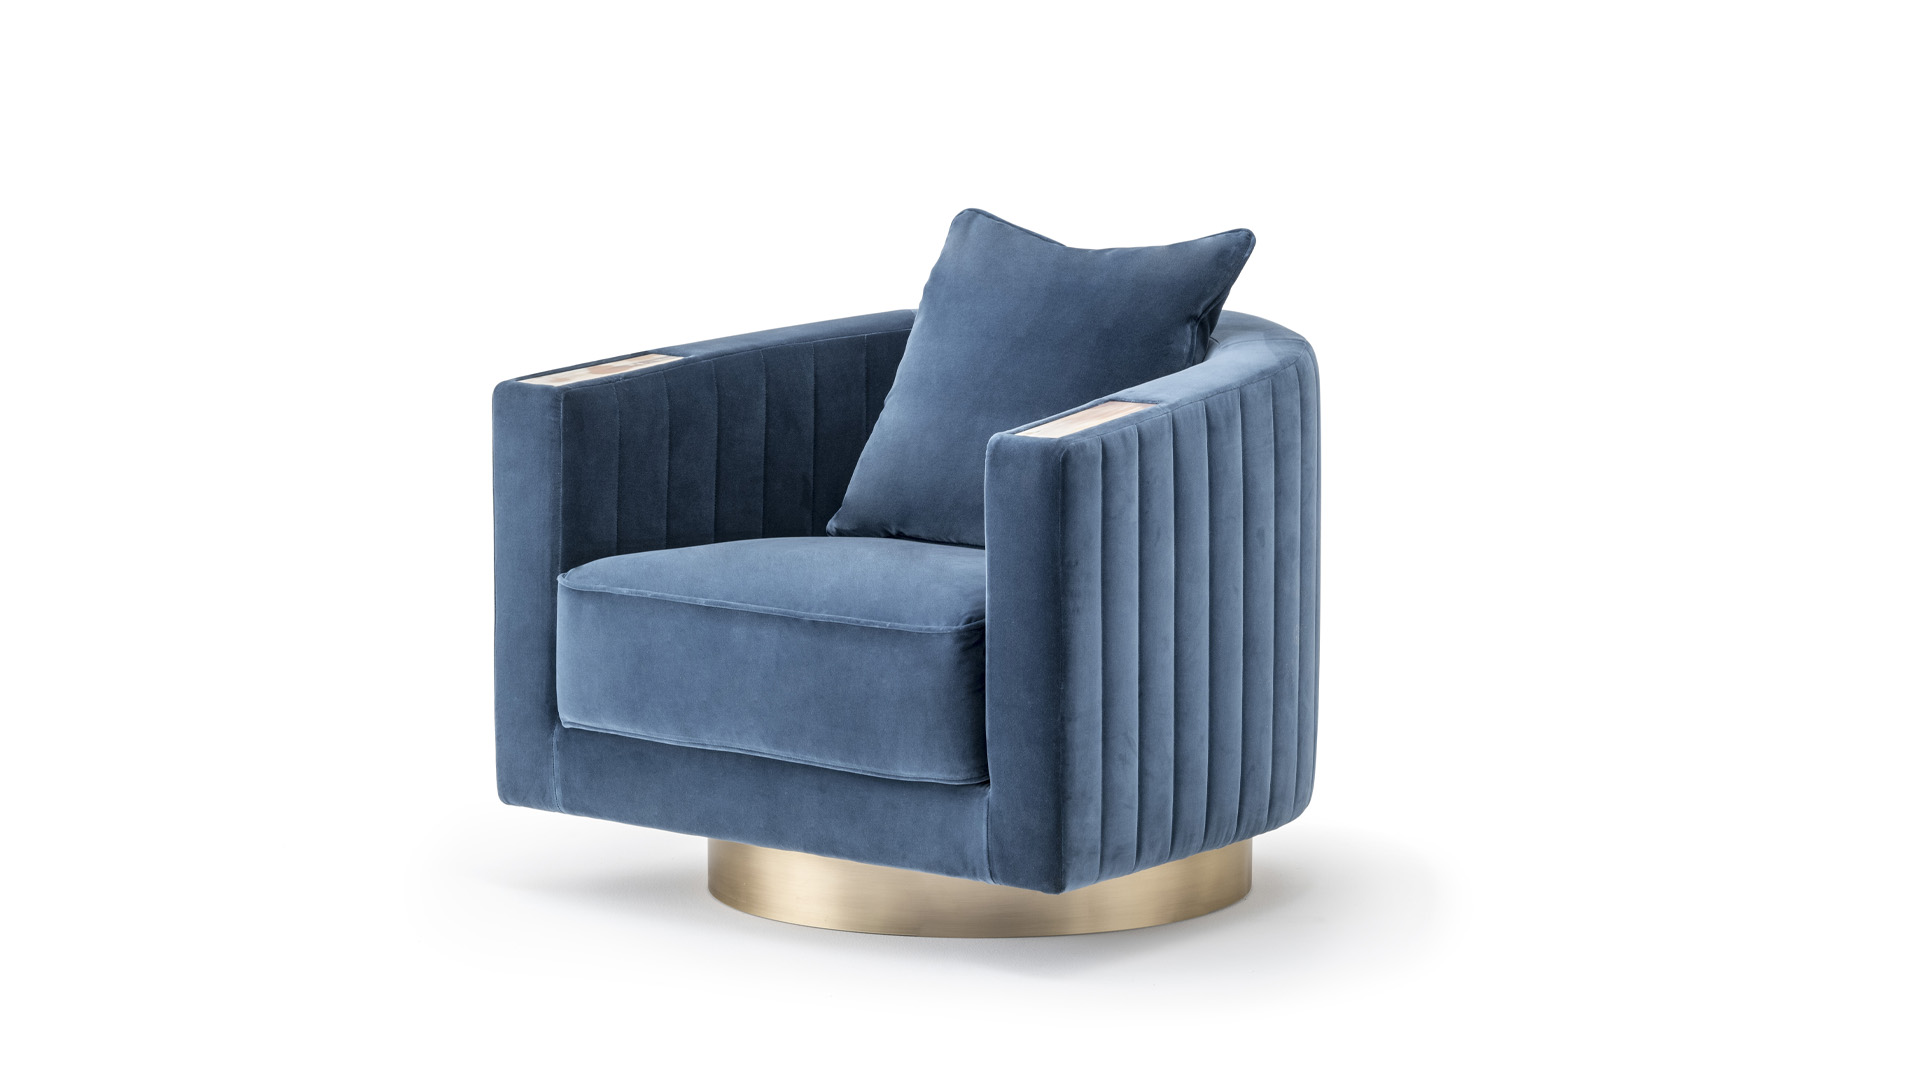 Sofas and seats - Rachele armchair with horn details 6040 - cover - Arcahorn